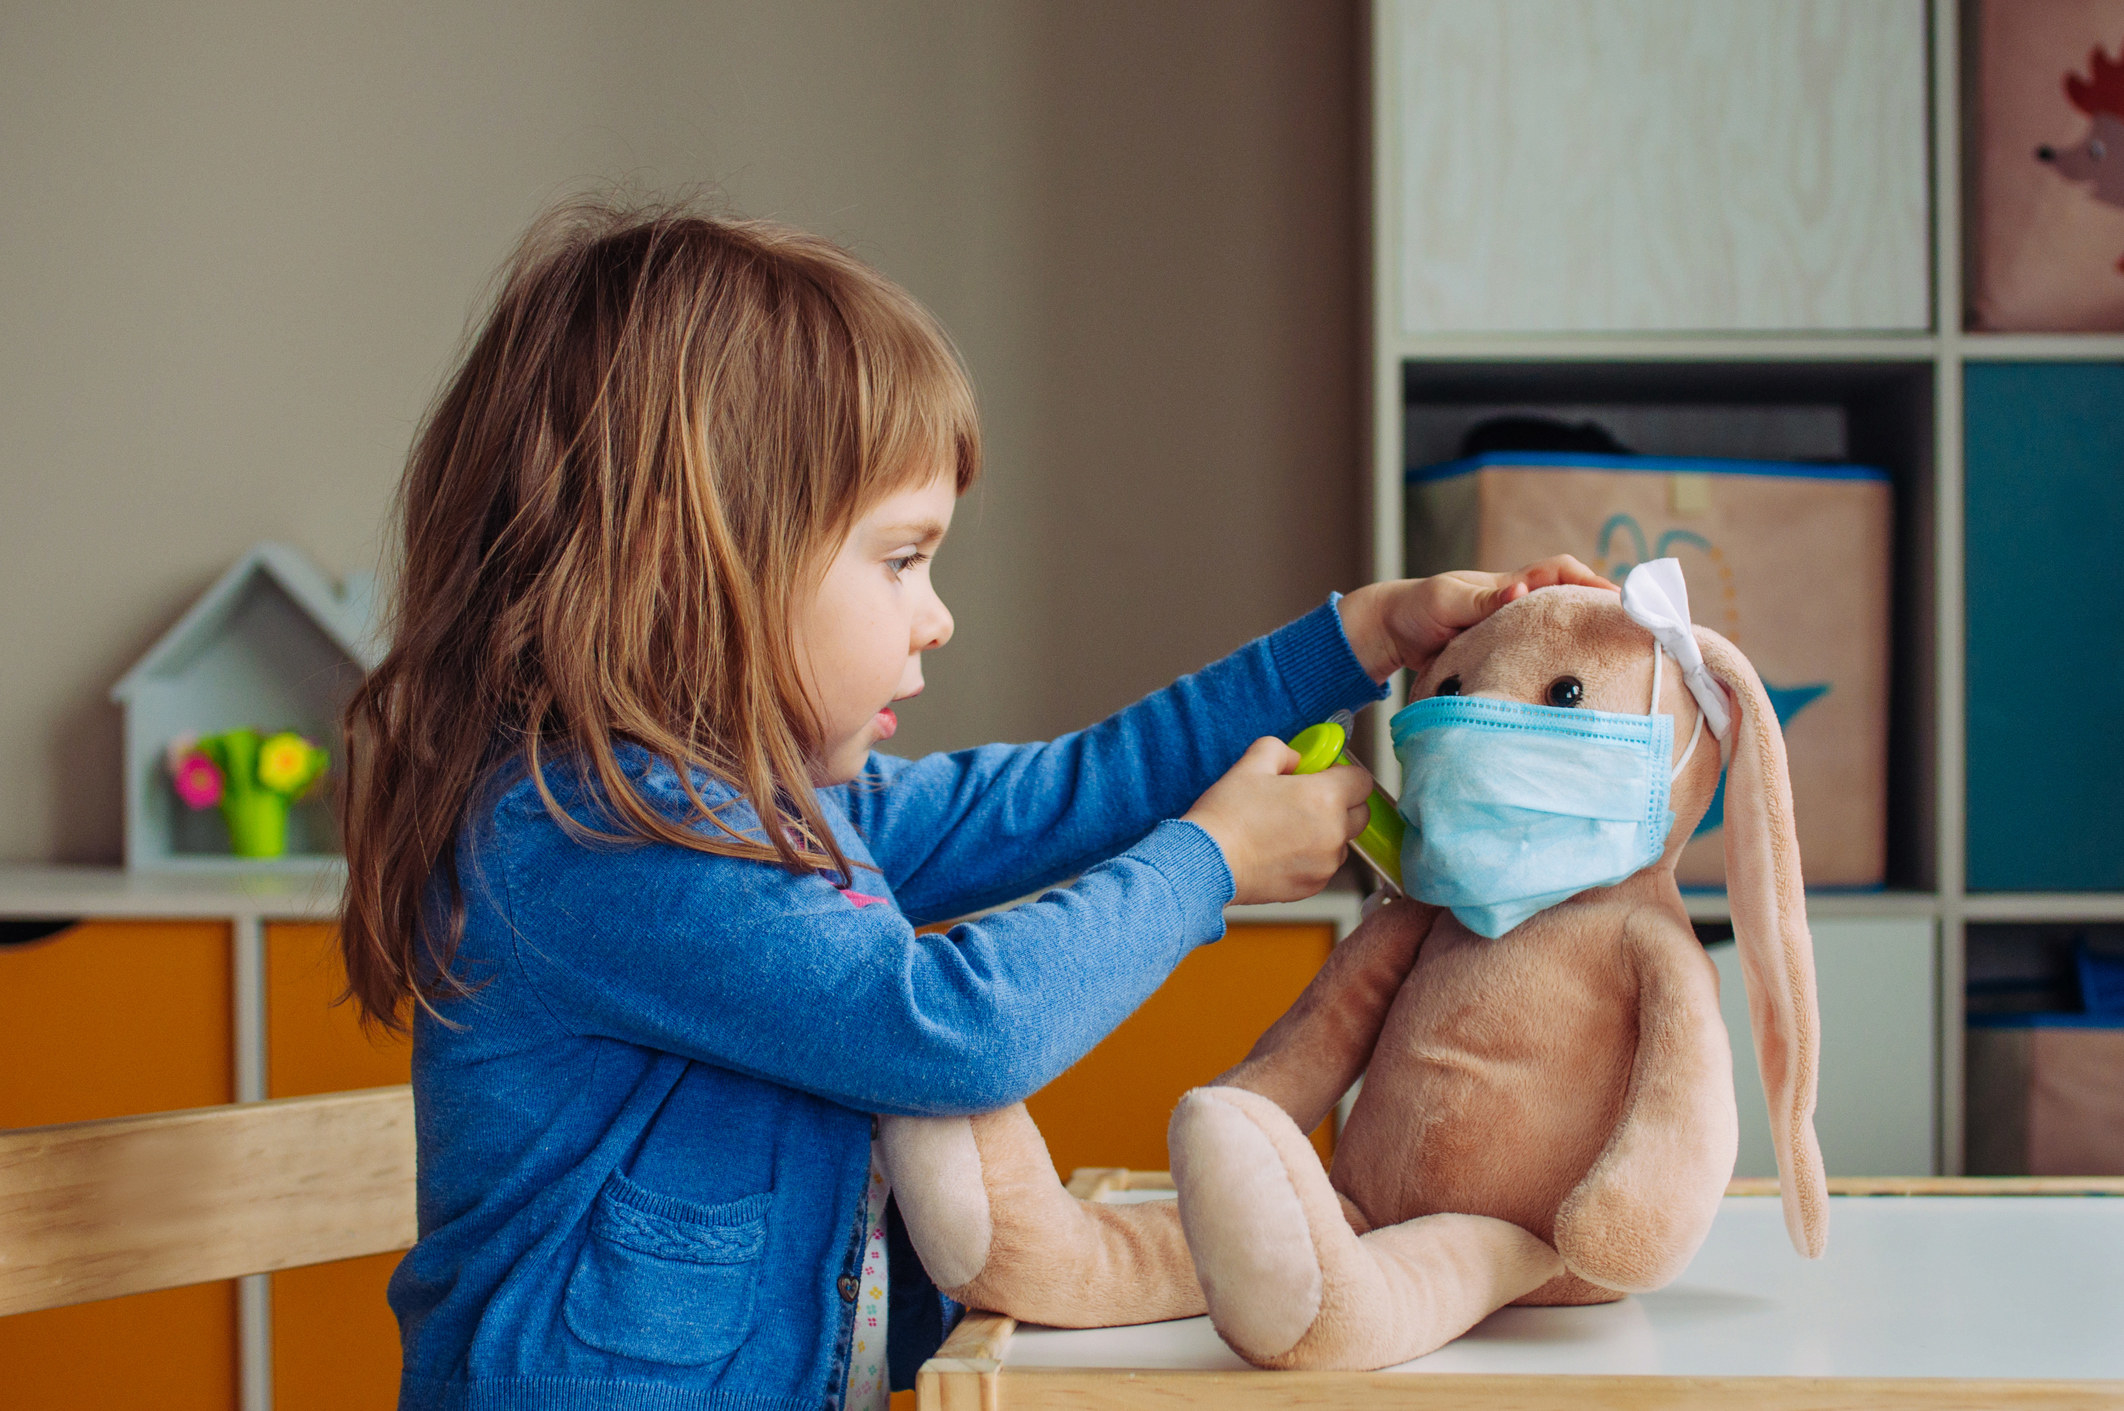 A small child plays doctor with her bunny rabbit toy